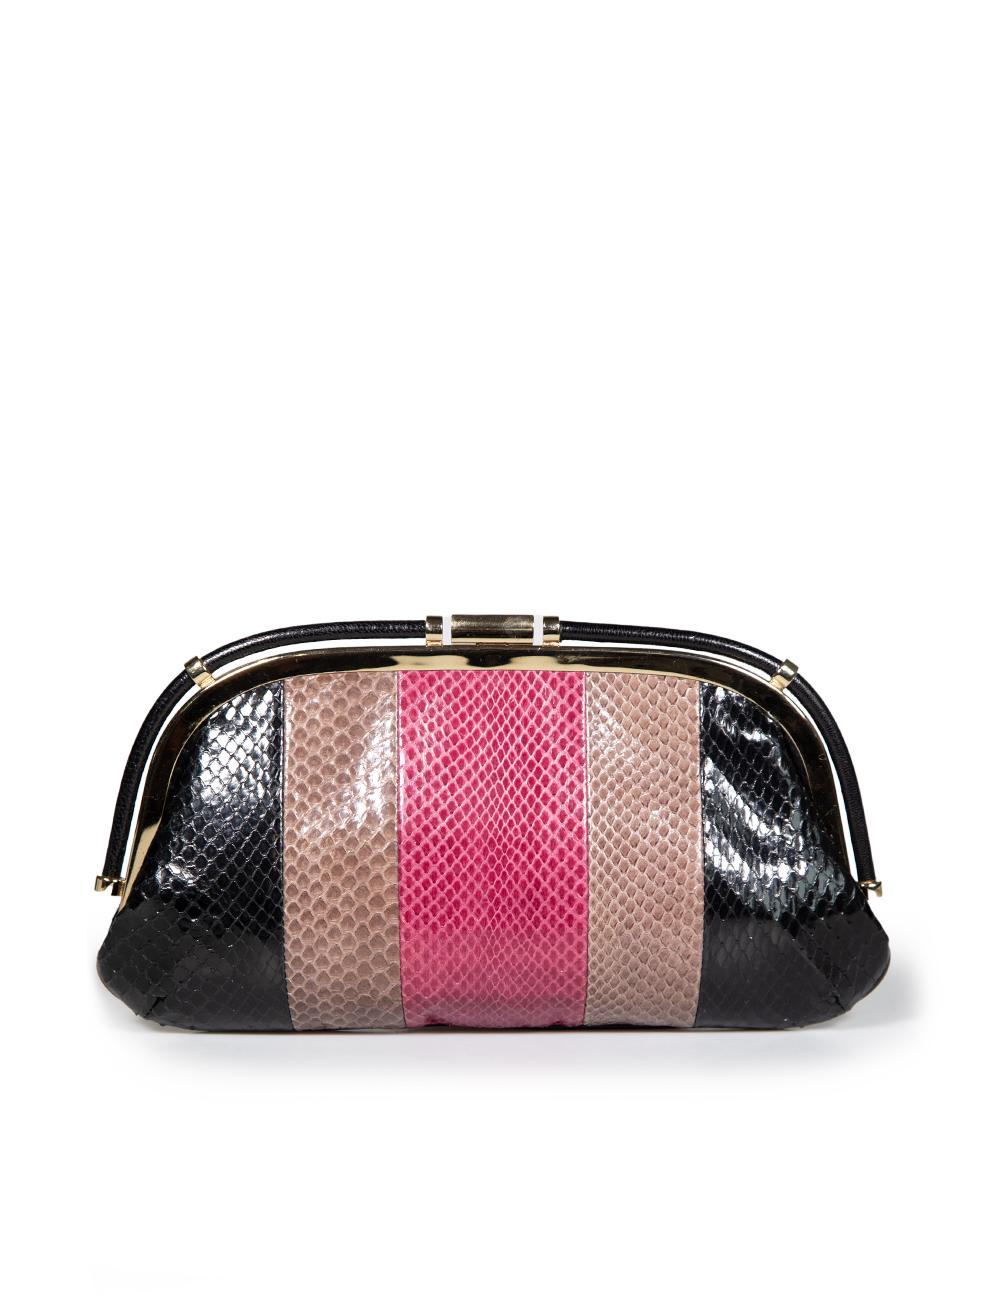 Anya Hindmarch Striped Colourblock Snakeskin Clutch In Excellent Condition For Sale In London, GB